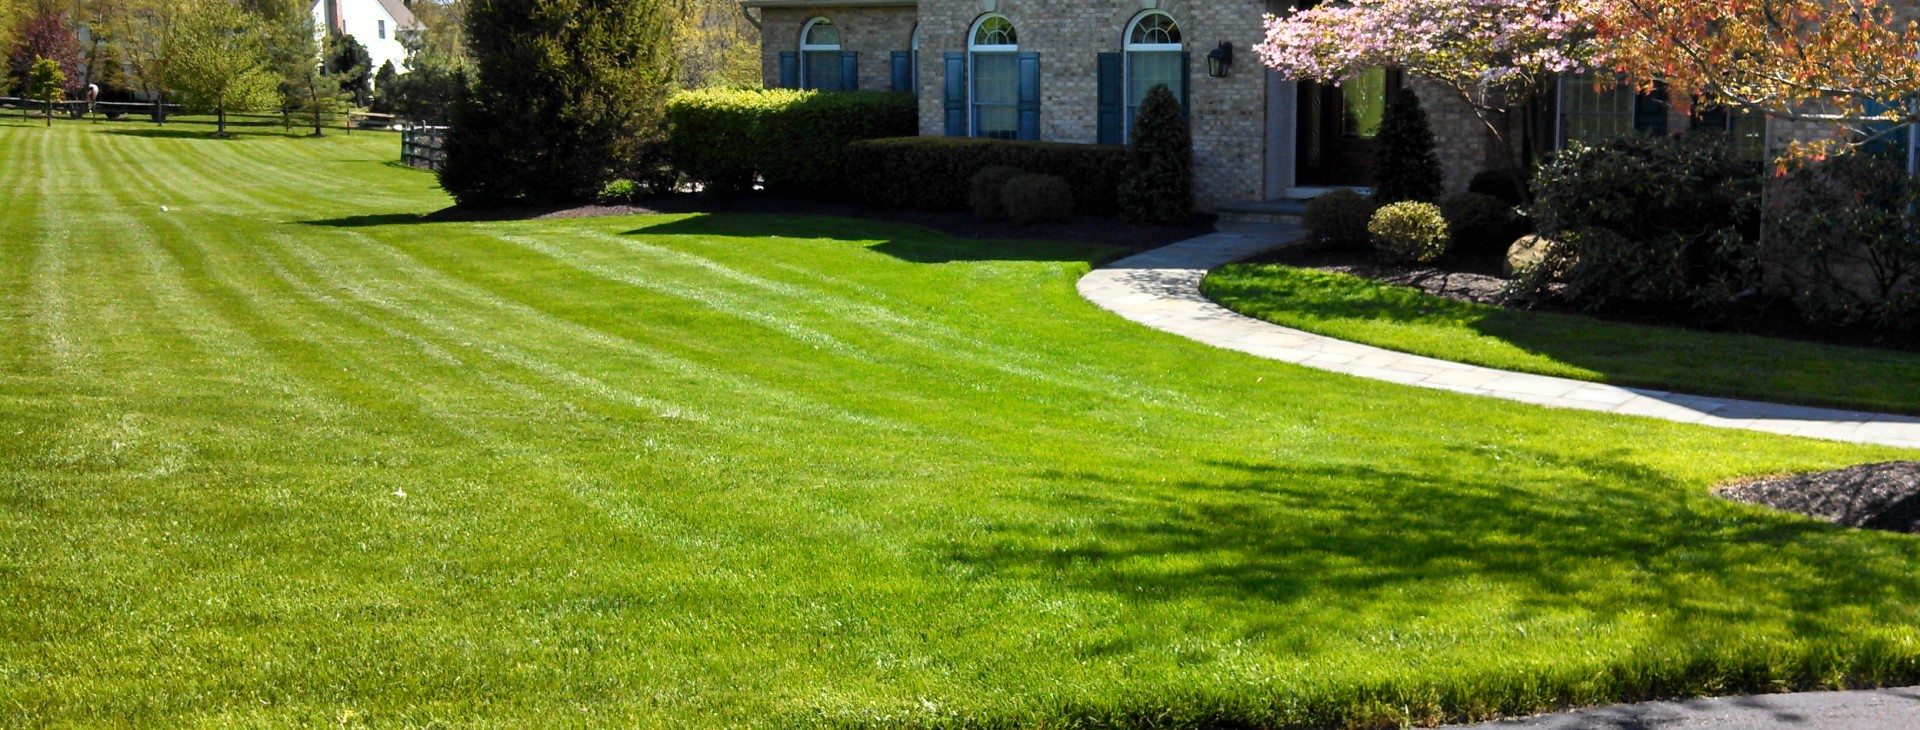 We'll give you the lawn<br />
of your dreams